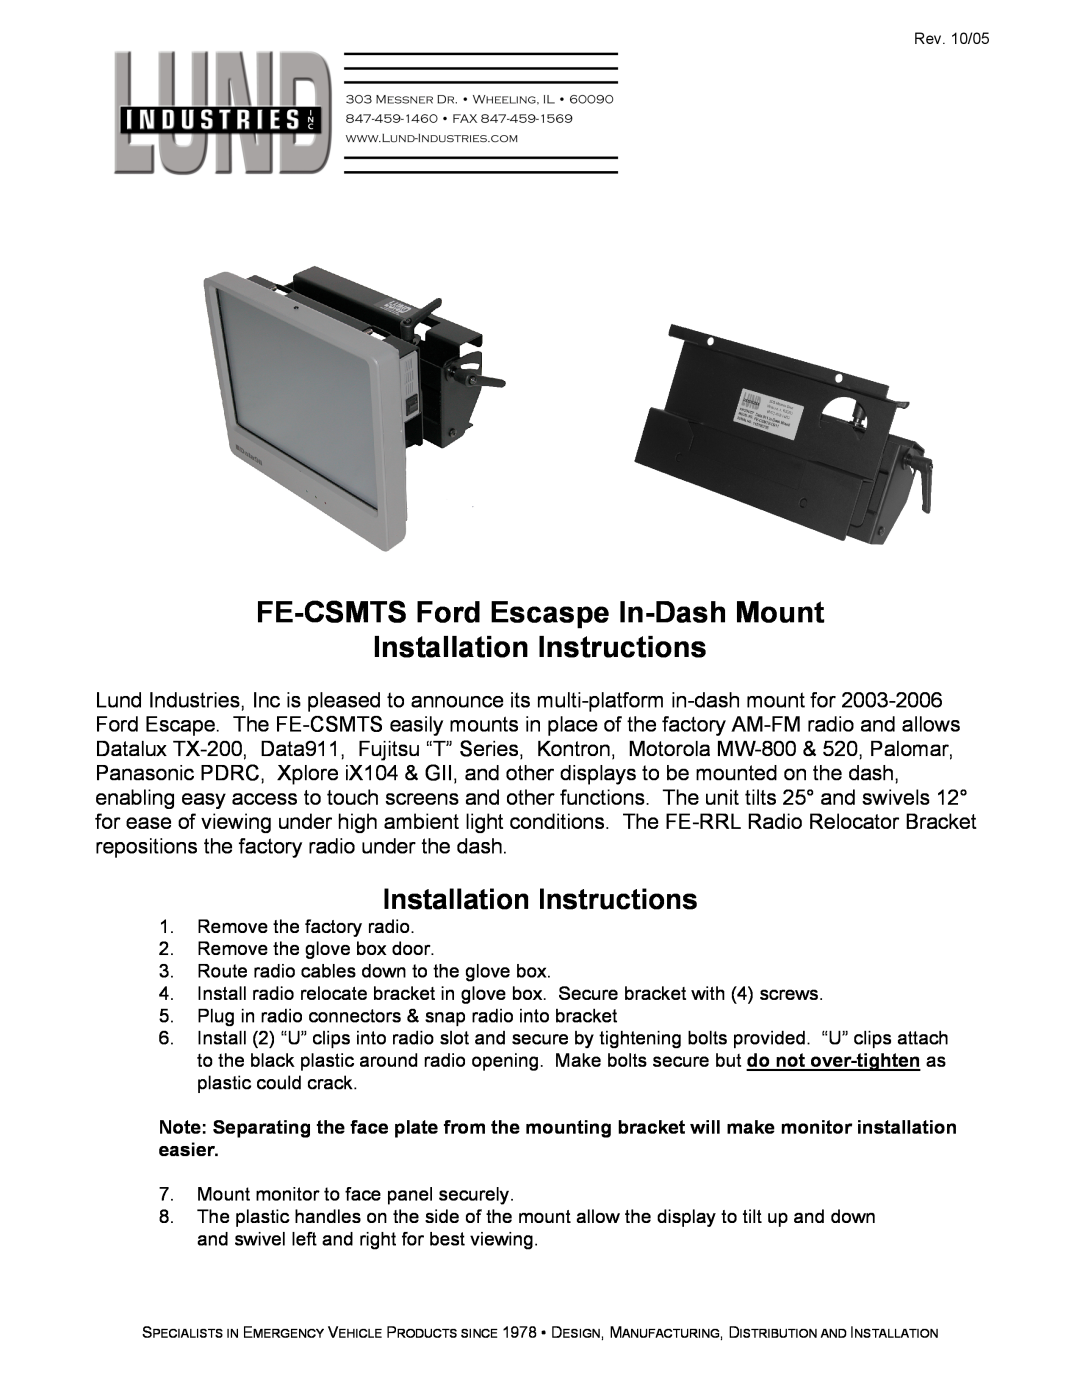 Lund Industries installation instructions FE-CSMTS Ford Escaspe In-Dash Mount Installation Instructions 